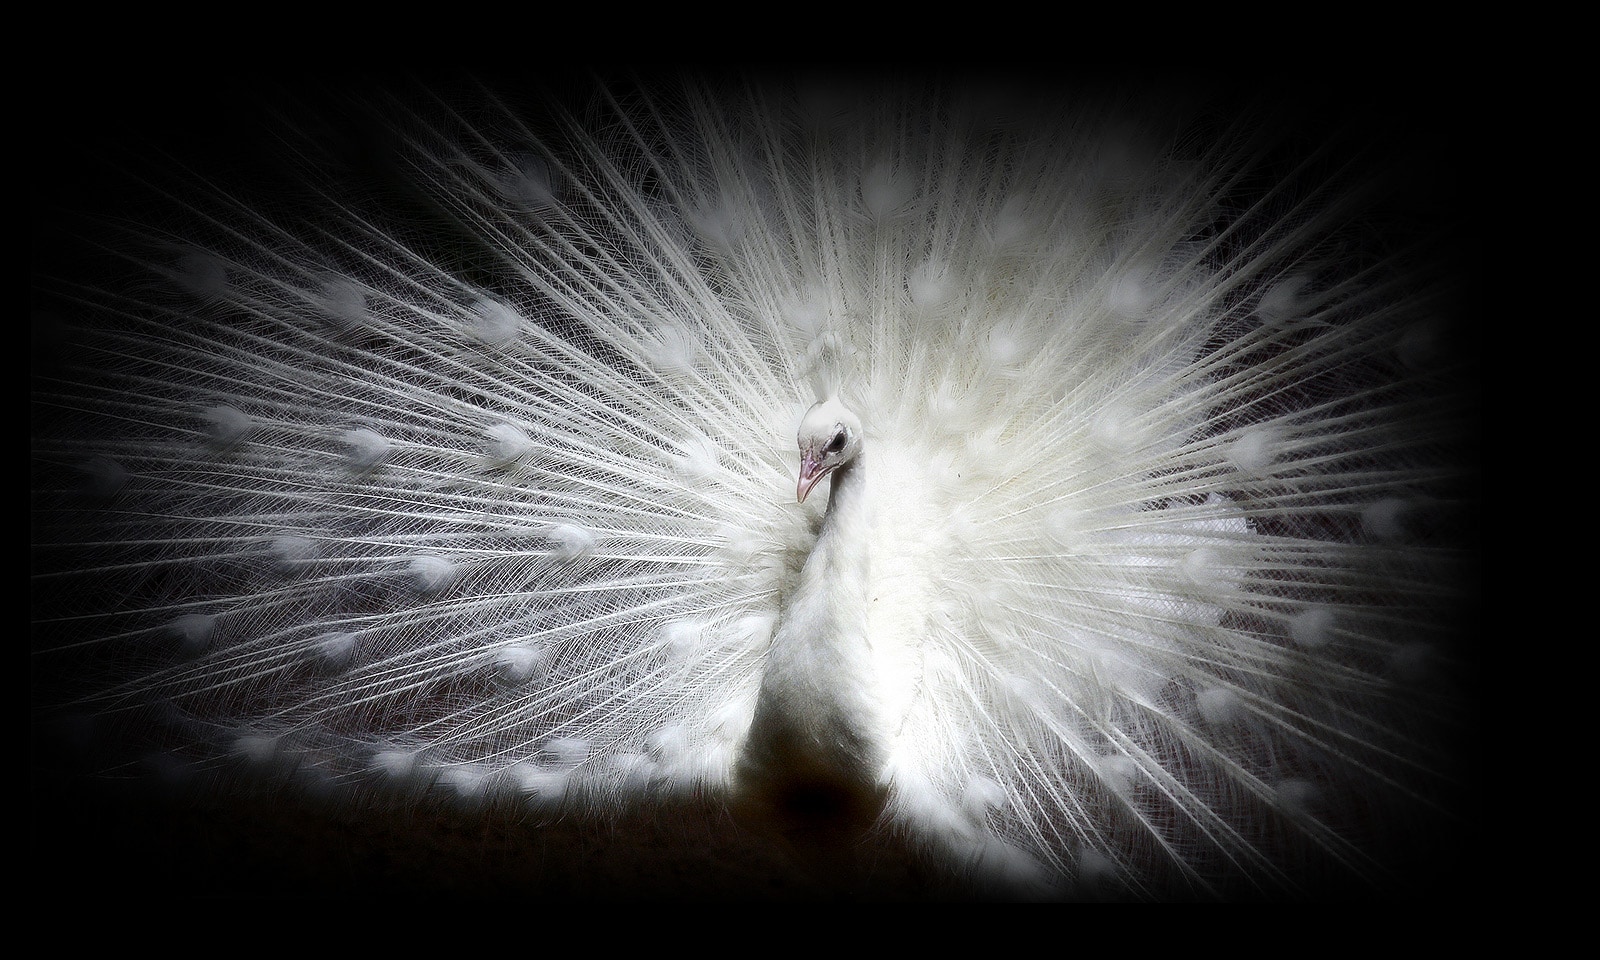 A picture of a white dog against a black background on an LG OLED  evo display shows each whispy hair clearly.